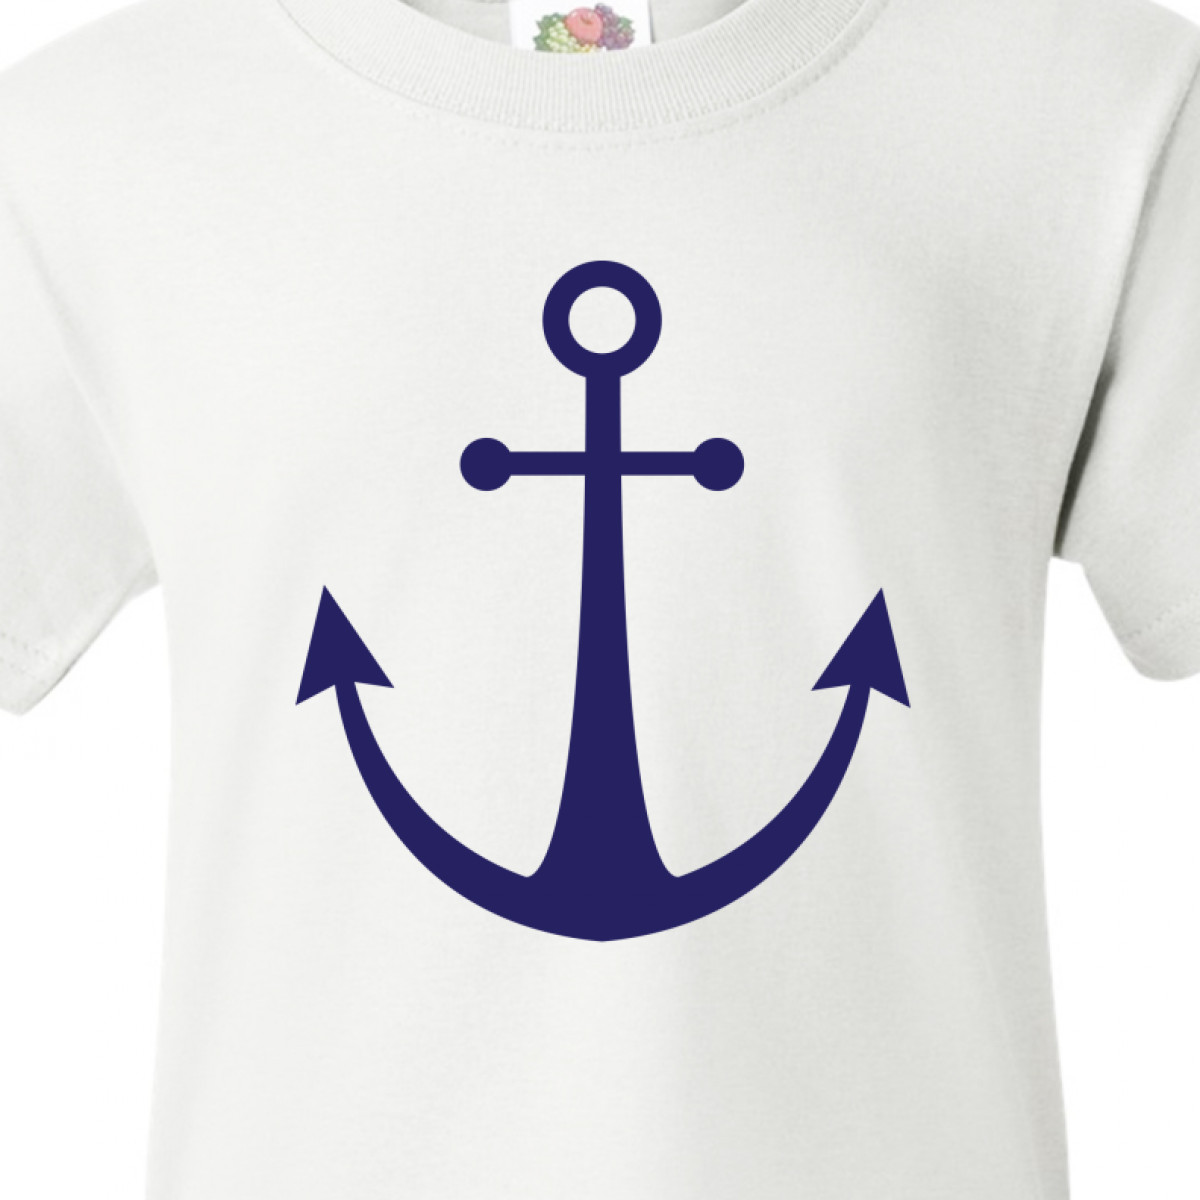 Inktastic Anchor Nautical Youth T-Shirt - image 3 of 4